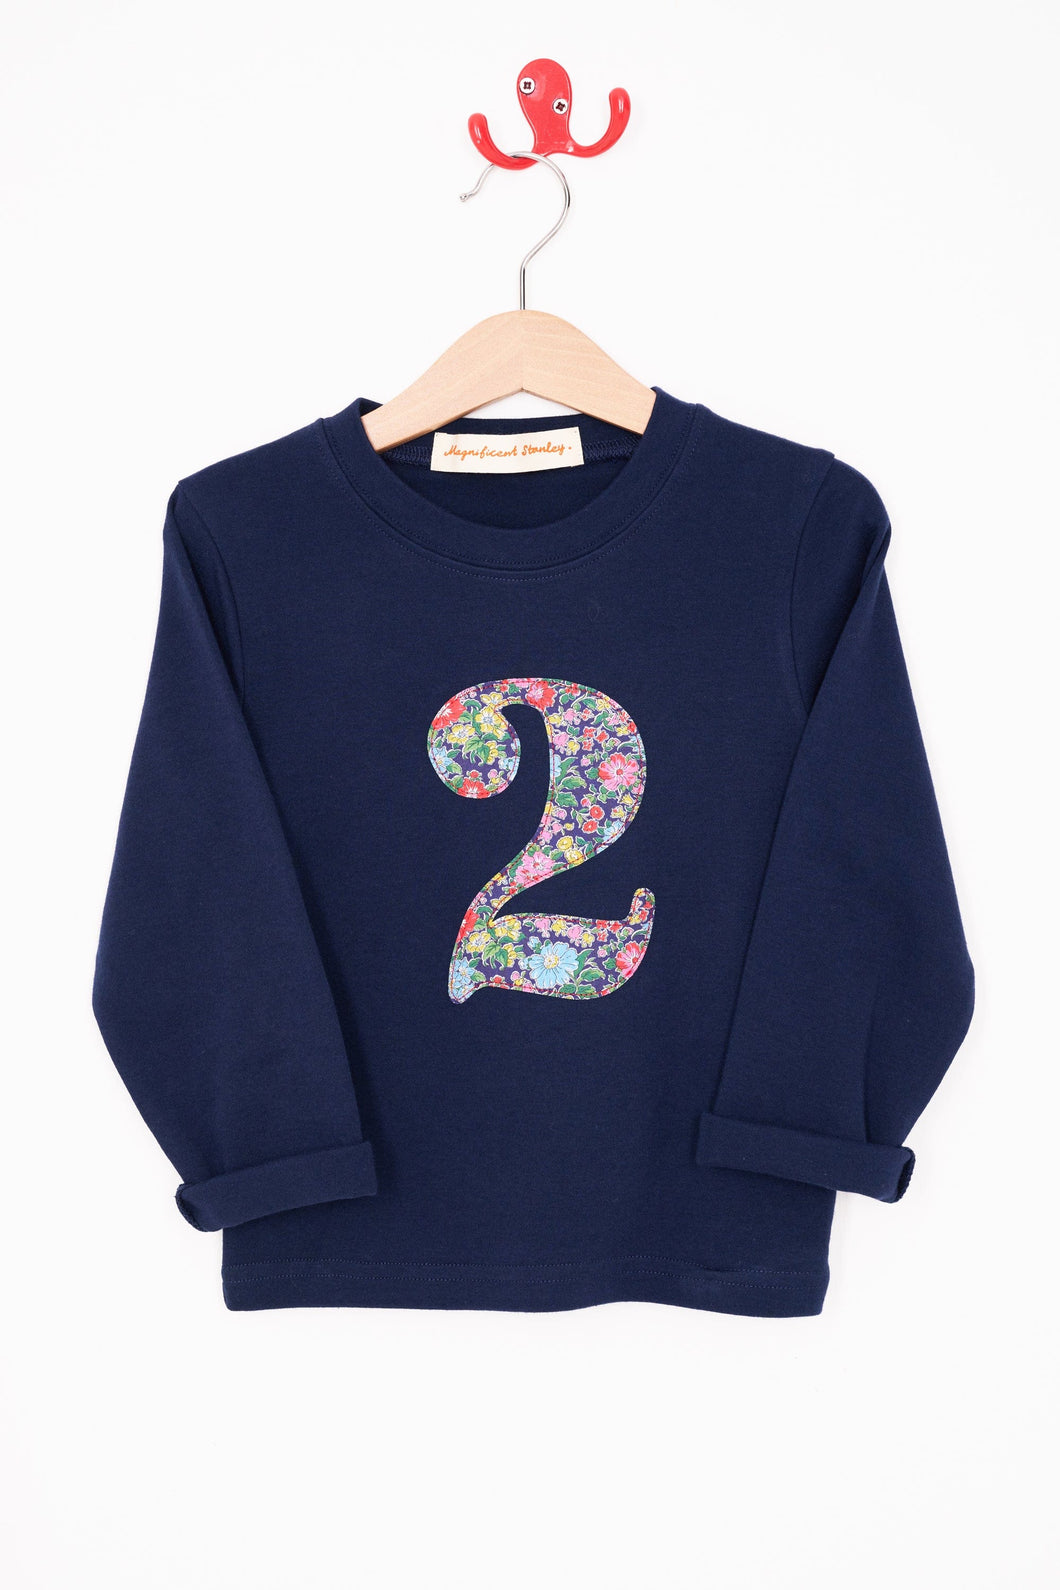 Magnificent Stanley Tee Number Navy T-Shirt in Clare Rich Liberty Print